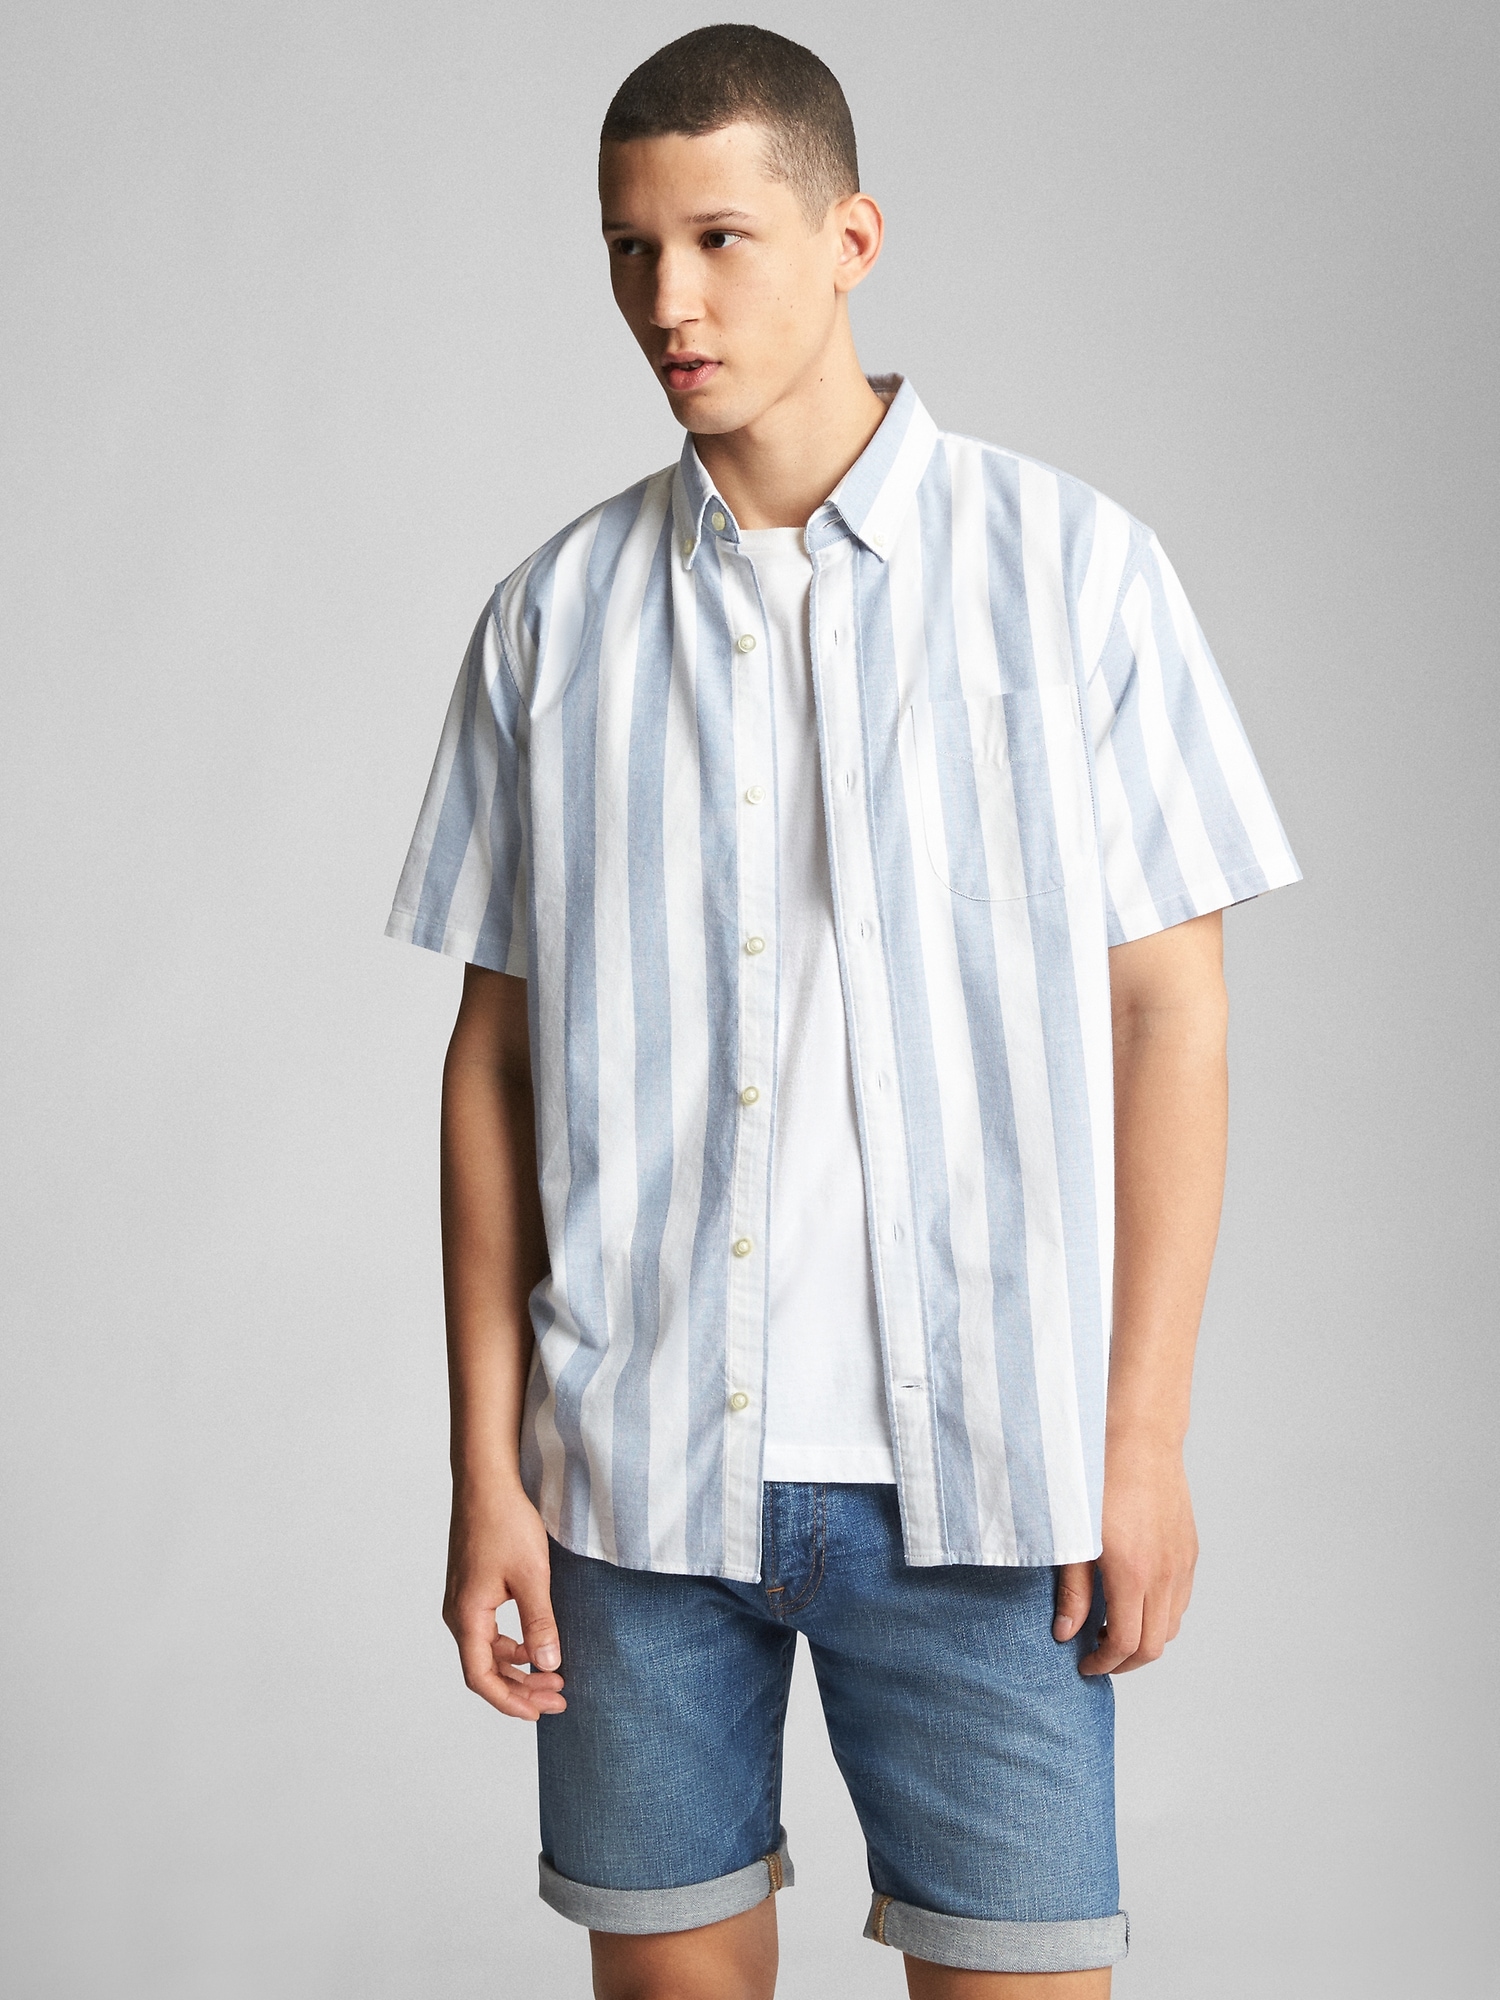 Lived-In Stretch Oxford Short Sleeve Shirt | Gap